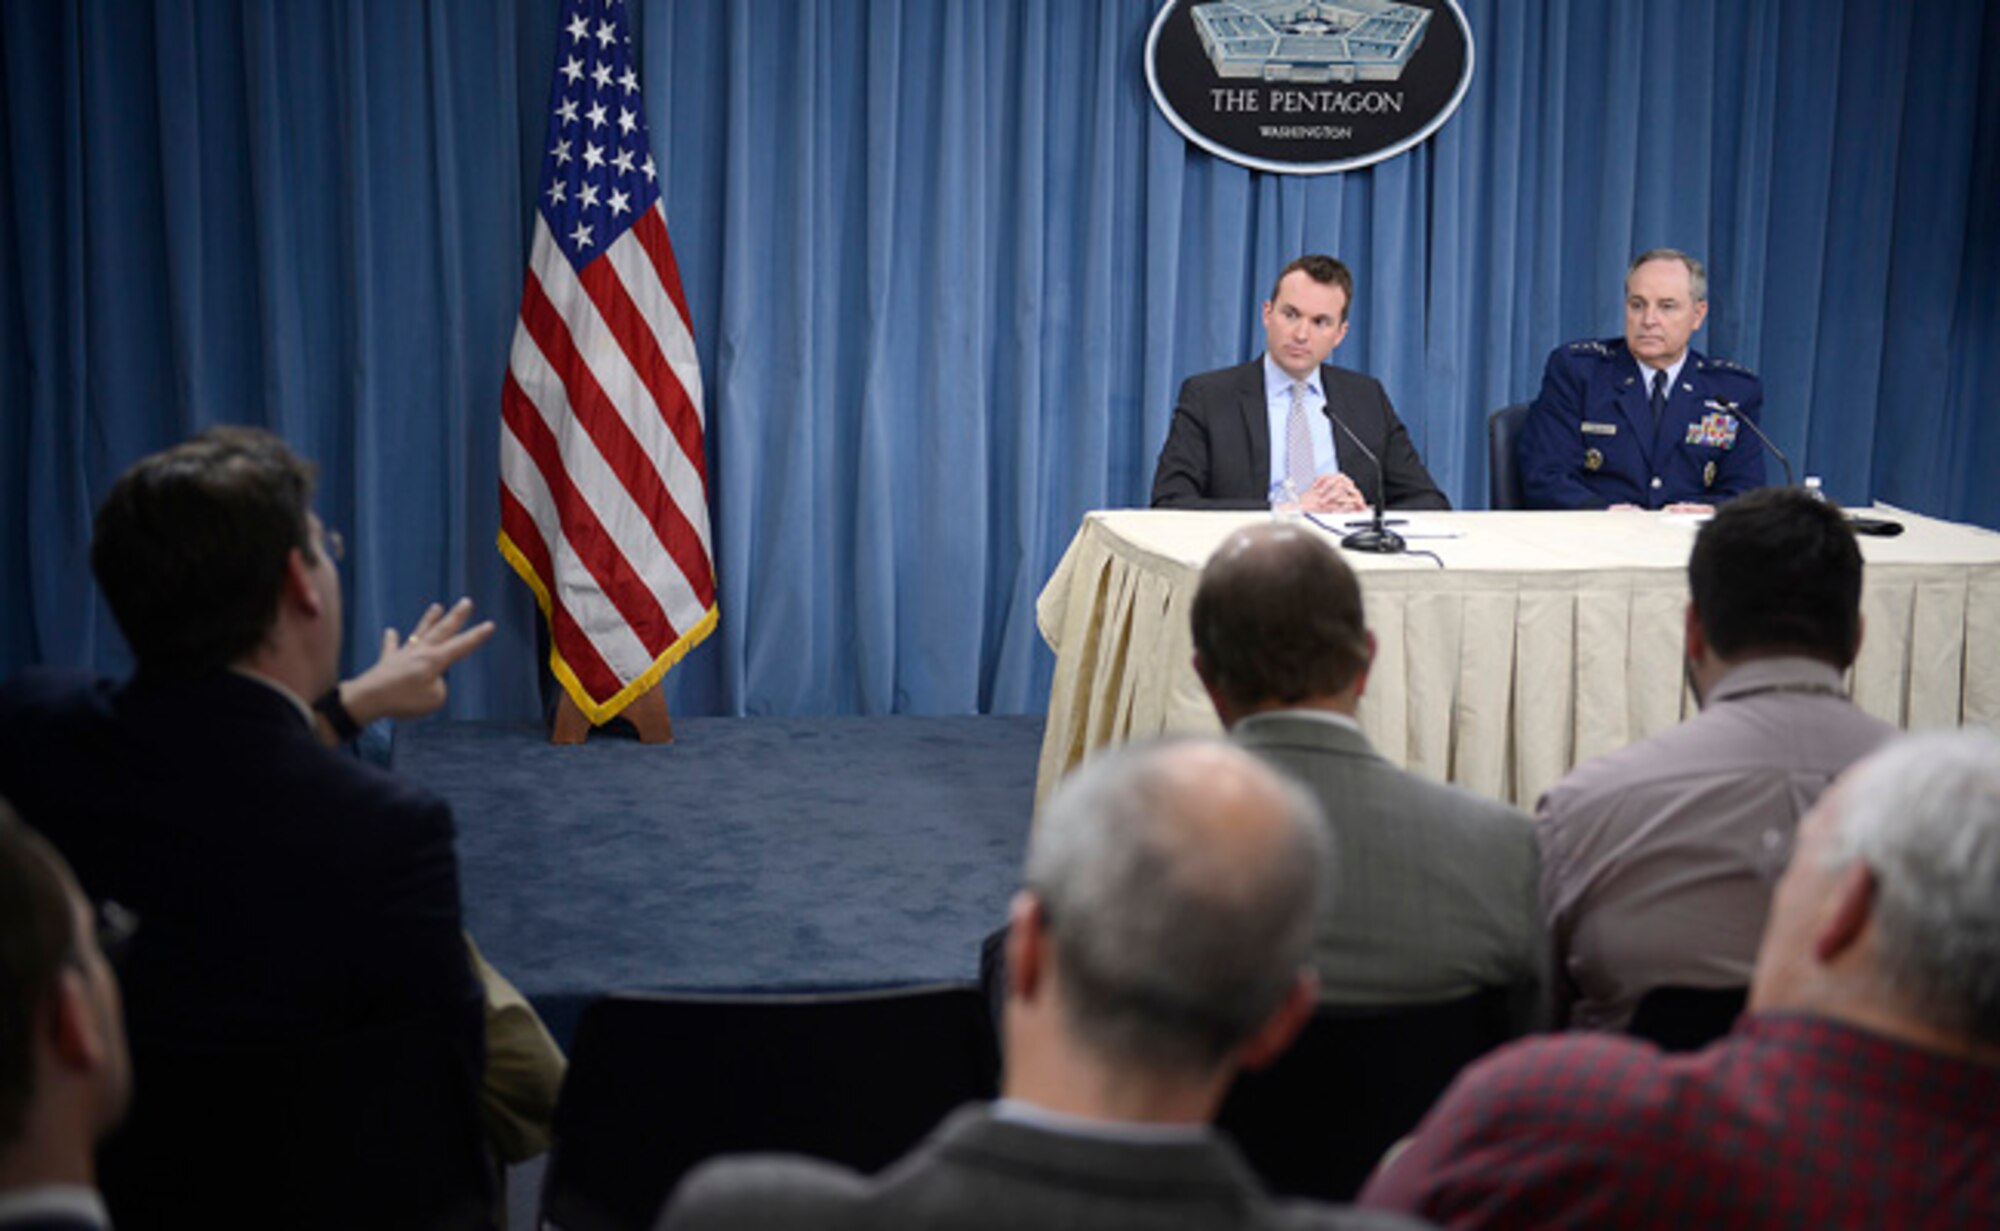 Acting Secretary of the Air Force Eric T. Fanning and Air Force Chief of Staff Gen. Mark A. Welsh III present the "State of the Air Force," during a Pentagon press briefing Dec. 13, 2013.  During the briefing, Fanning and Welsh addressed current Air Force challenges, to include sequestration's impacts to readiness, modernization and force structure, and their efforts to plan for a credible capable force over the next 10 years.  (U.S. Air Force photo/Scott M. Ash)